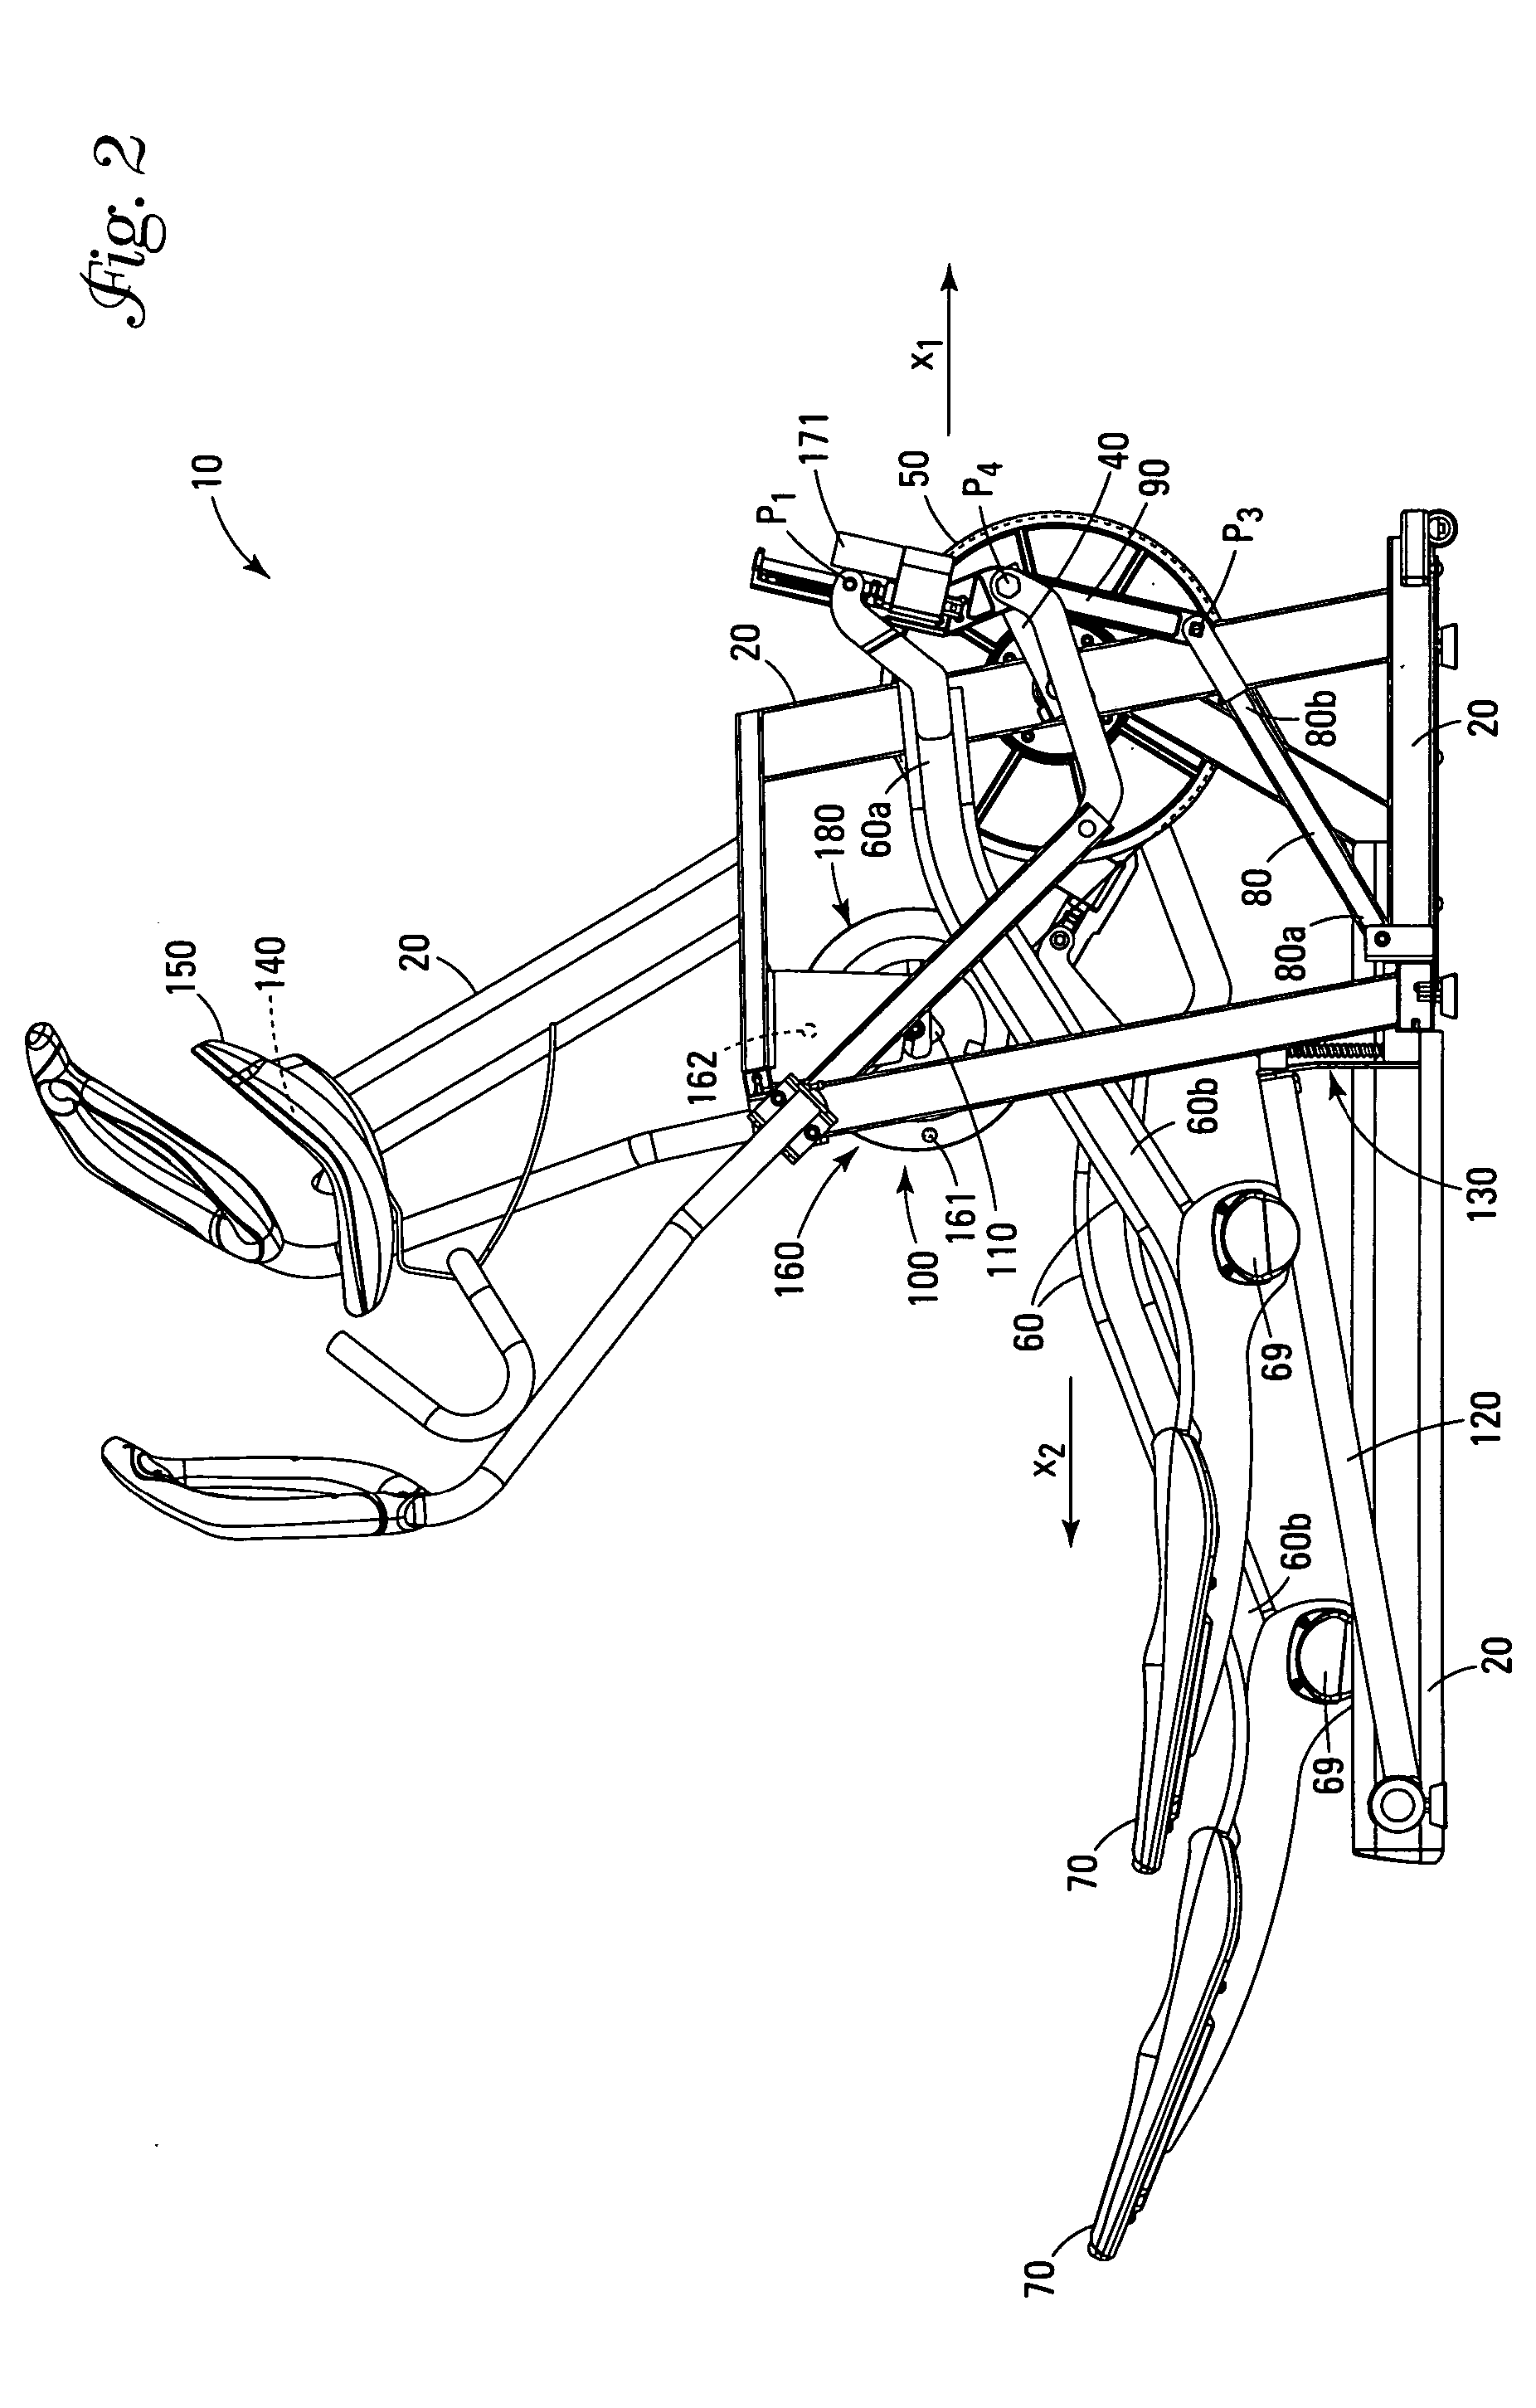 Exercise equipment with automatic adjustment of stride length and/or stride height based upon speed of foot support